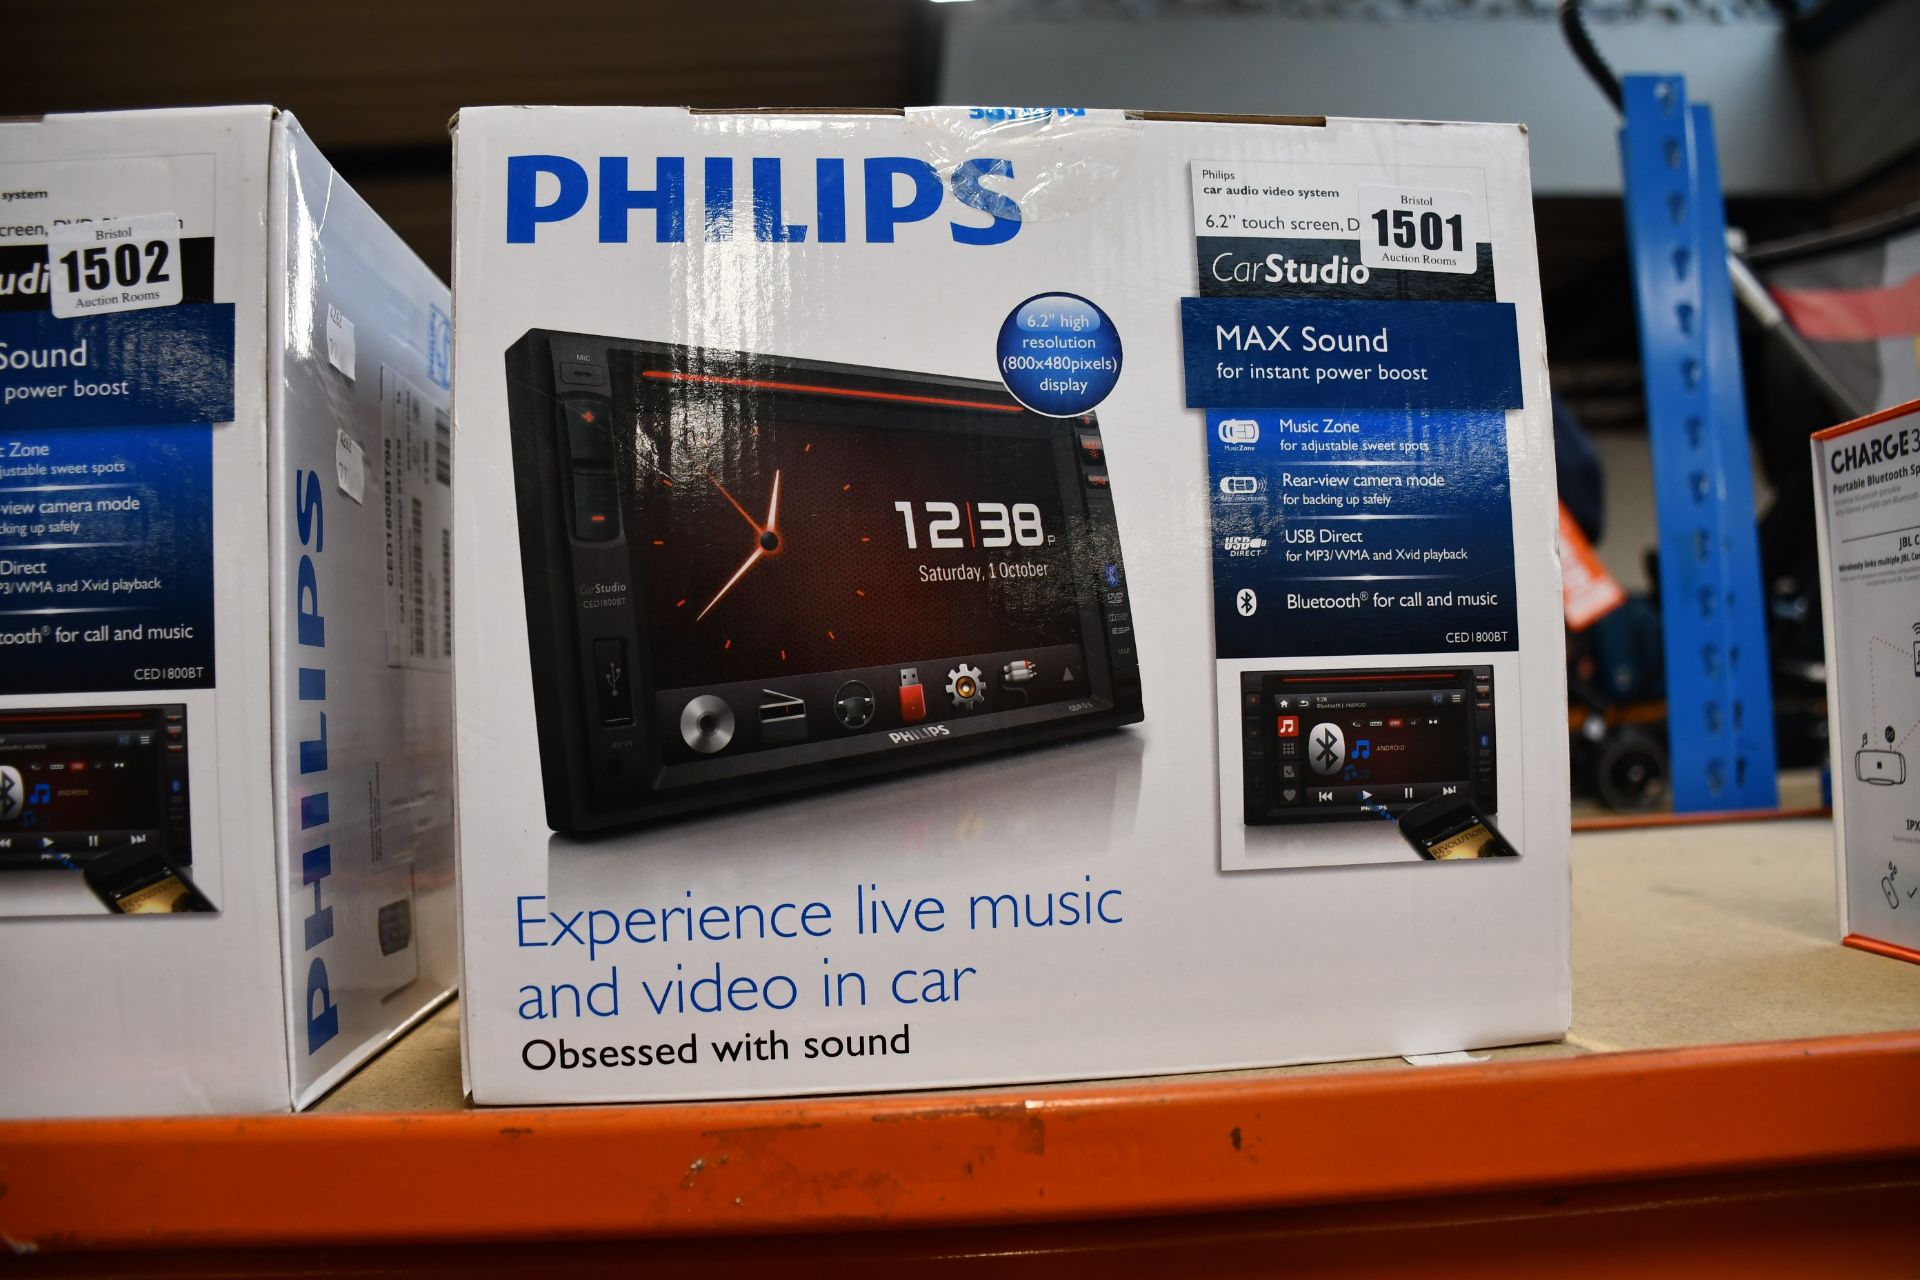 A boxed as new Phillips car multi media system (CED1800BT/98).